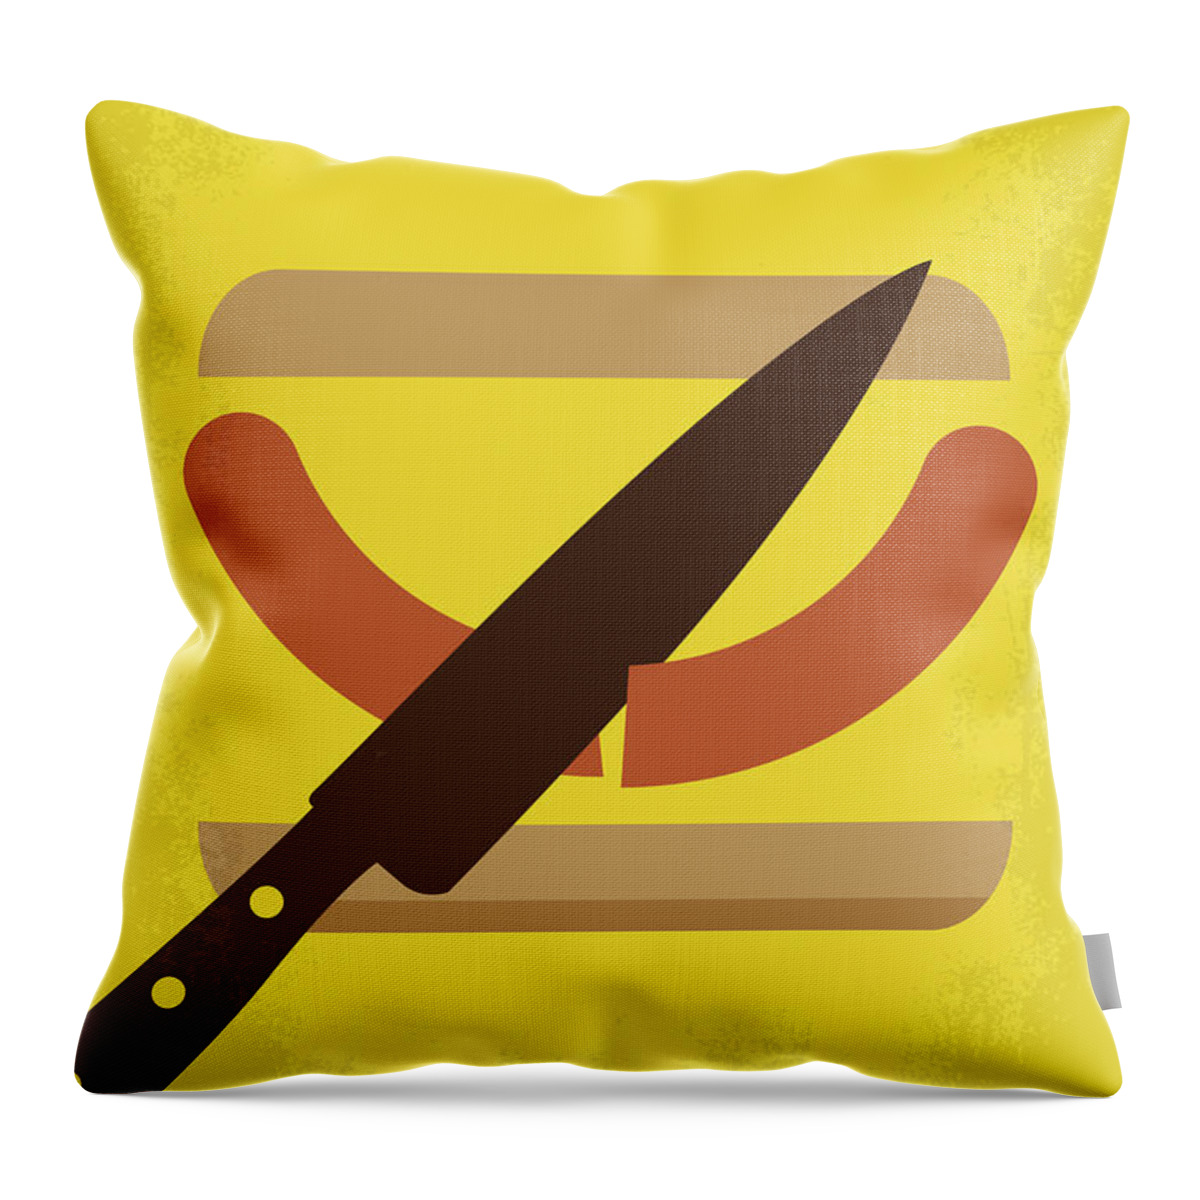 Sausage Party Throw Pillow featuring the digital art No704 My Sausage Party minimal movie poster by Chungkong Art